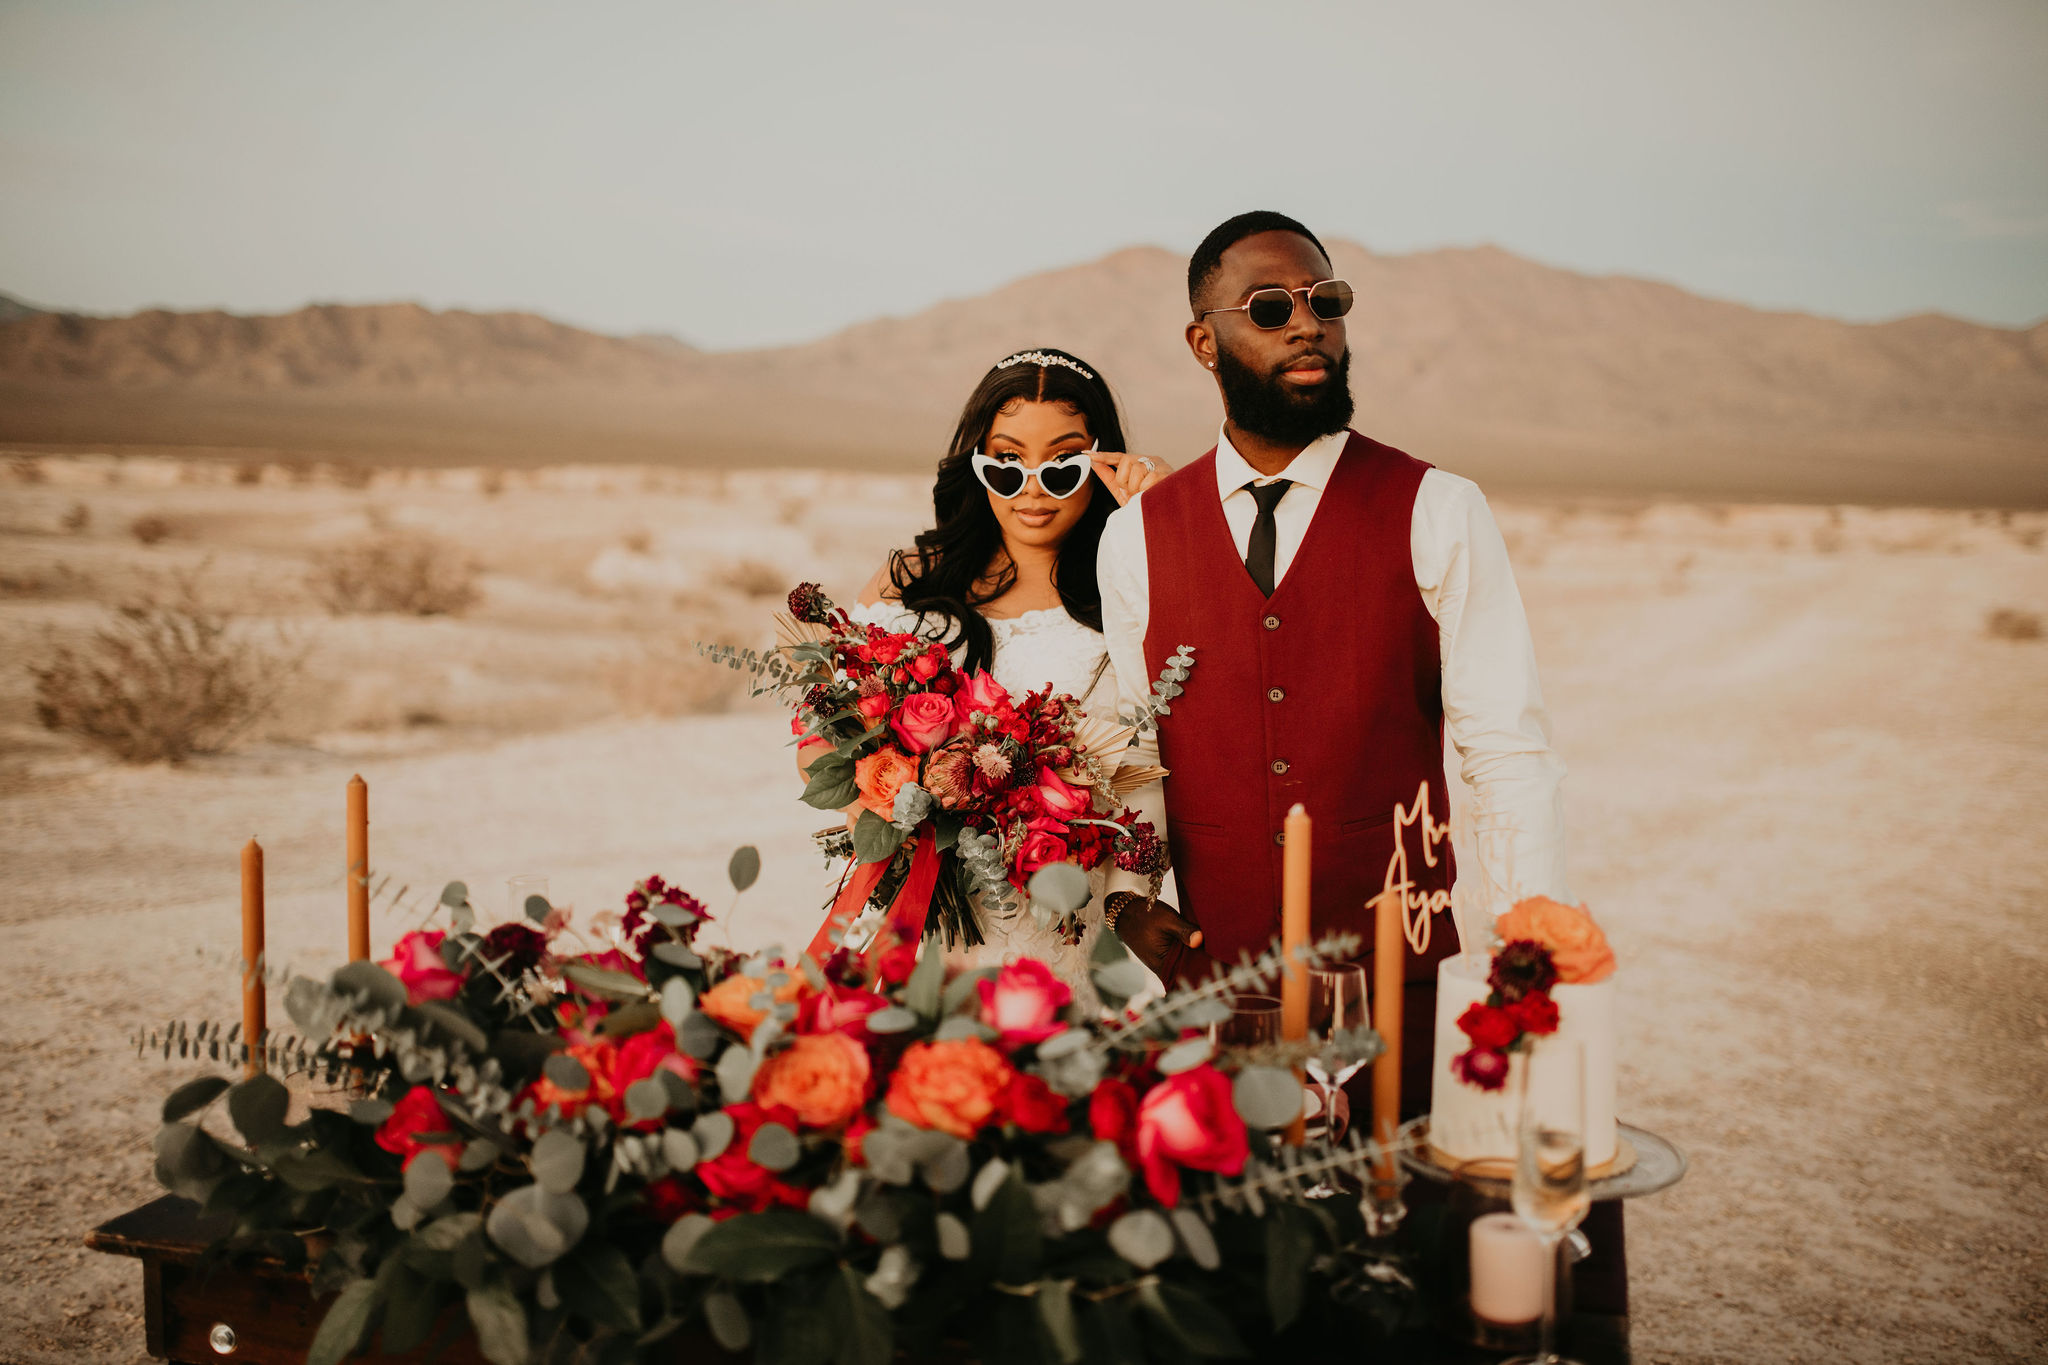 Newlyweds in Sunglasses at Sweetheart Table 